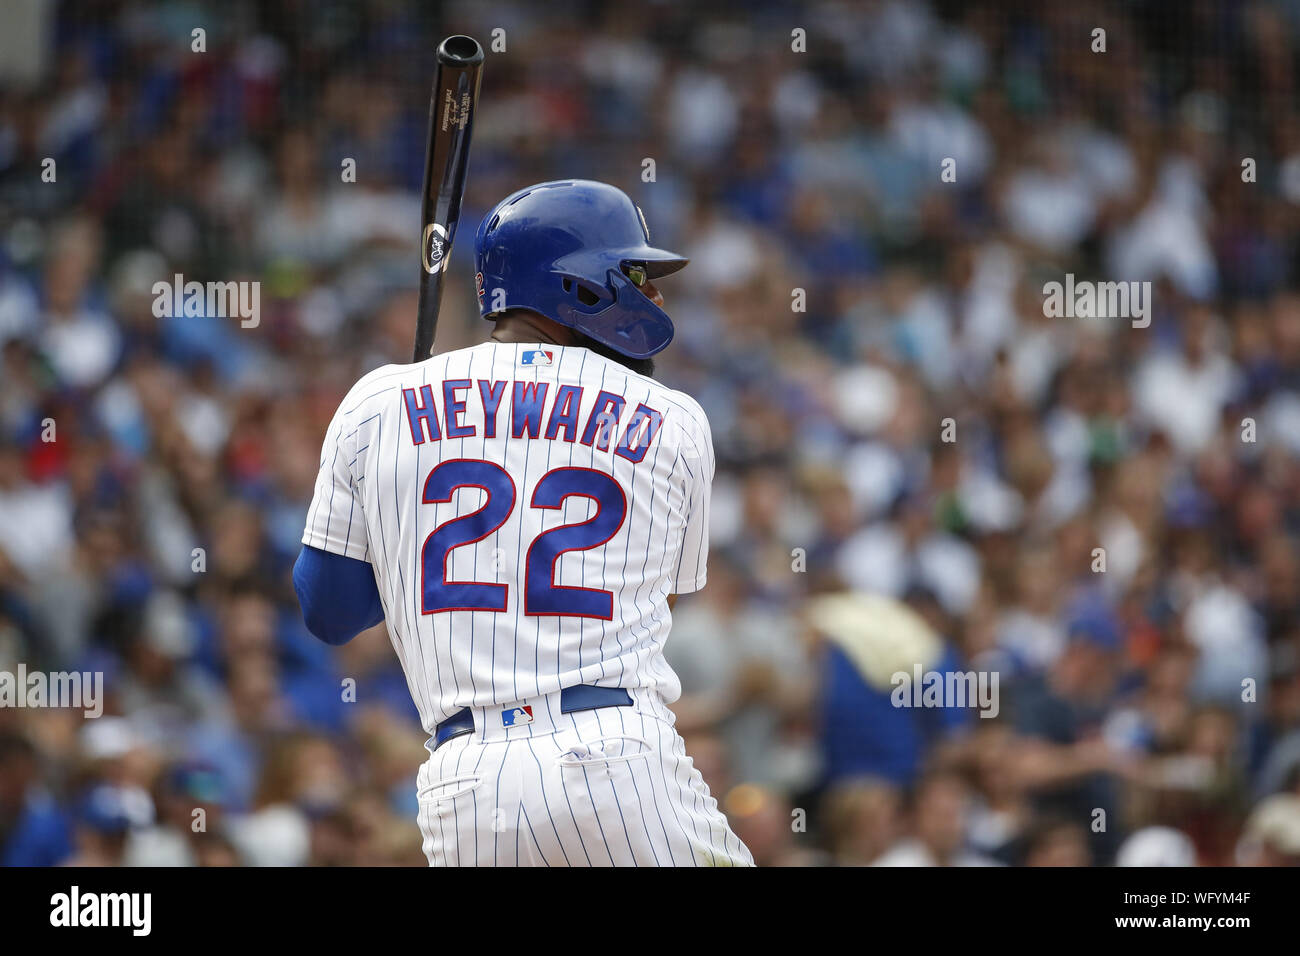 Chicago, USA. 31st Aug, 2019. Chicago Cubs right fielder Jason Heyward bats against the Milwaukee Brewers in the fifth inning at Wrigley Field on Saturday, August 31, 2019 in Chicago. Credit: UPI/Alamy Live News Stock Photo